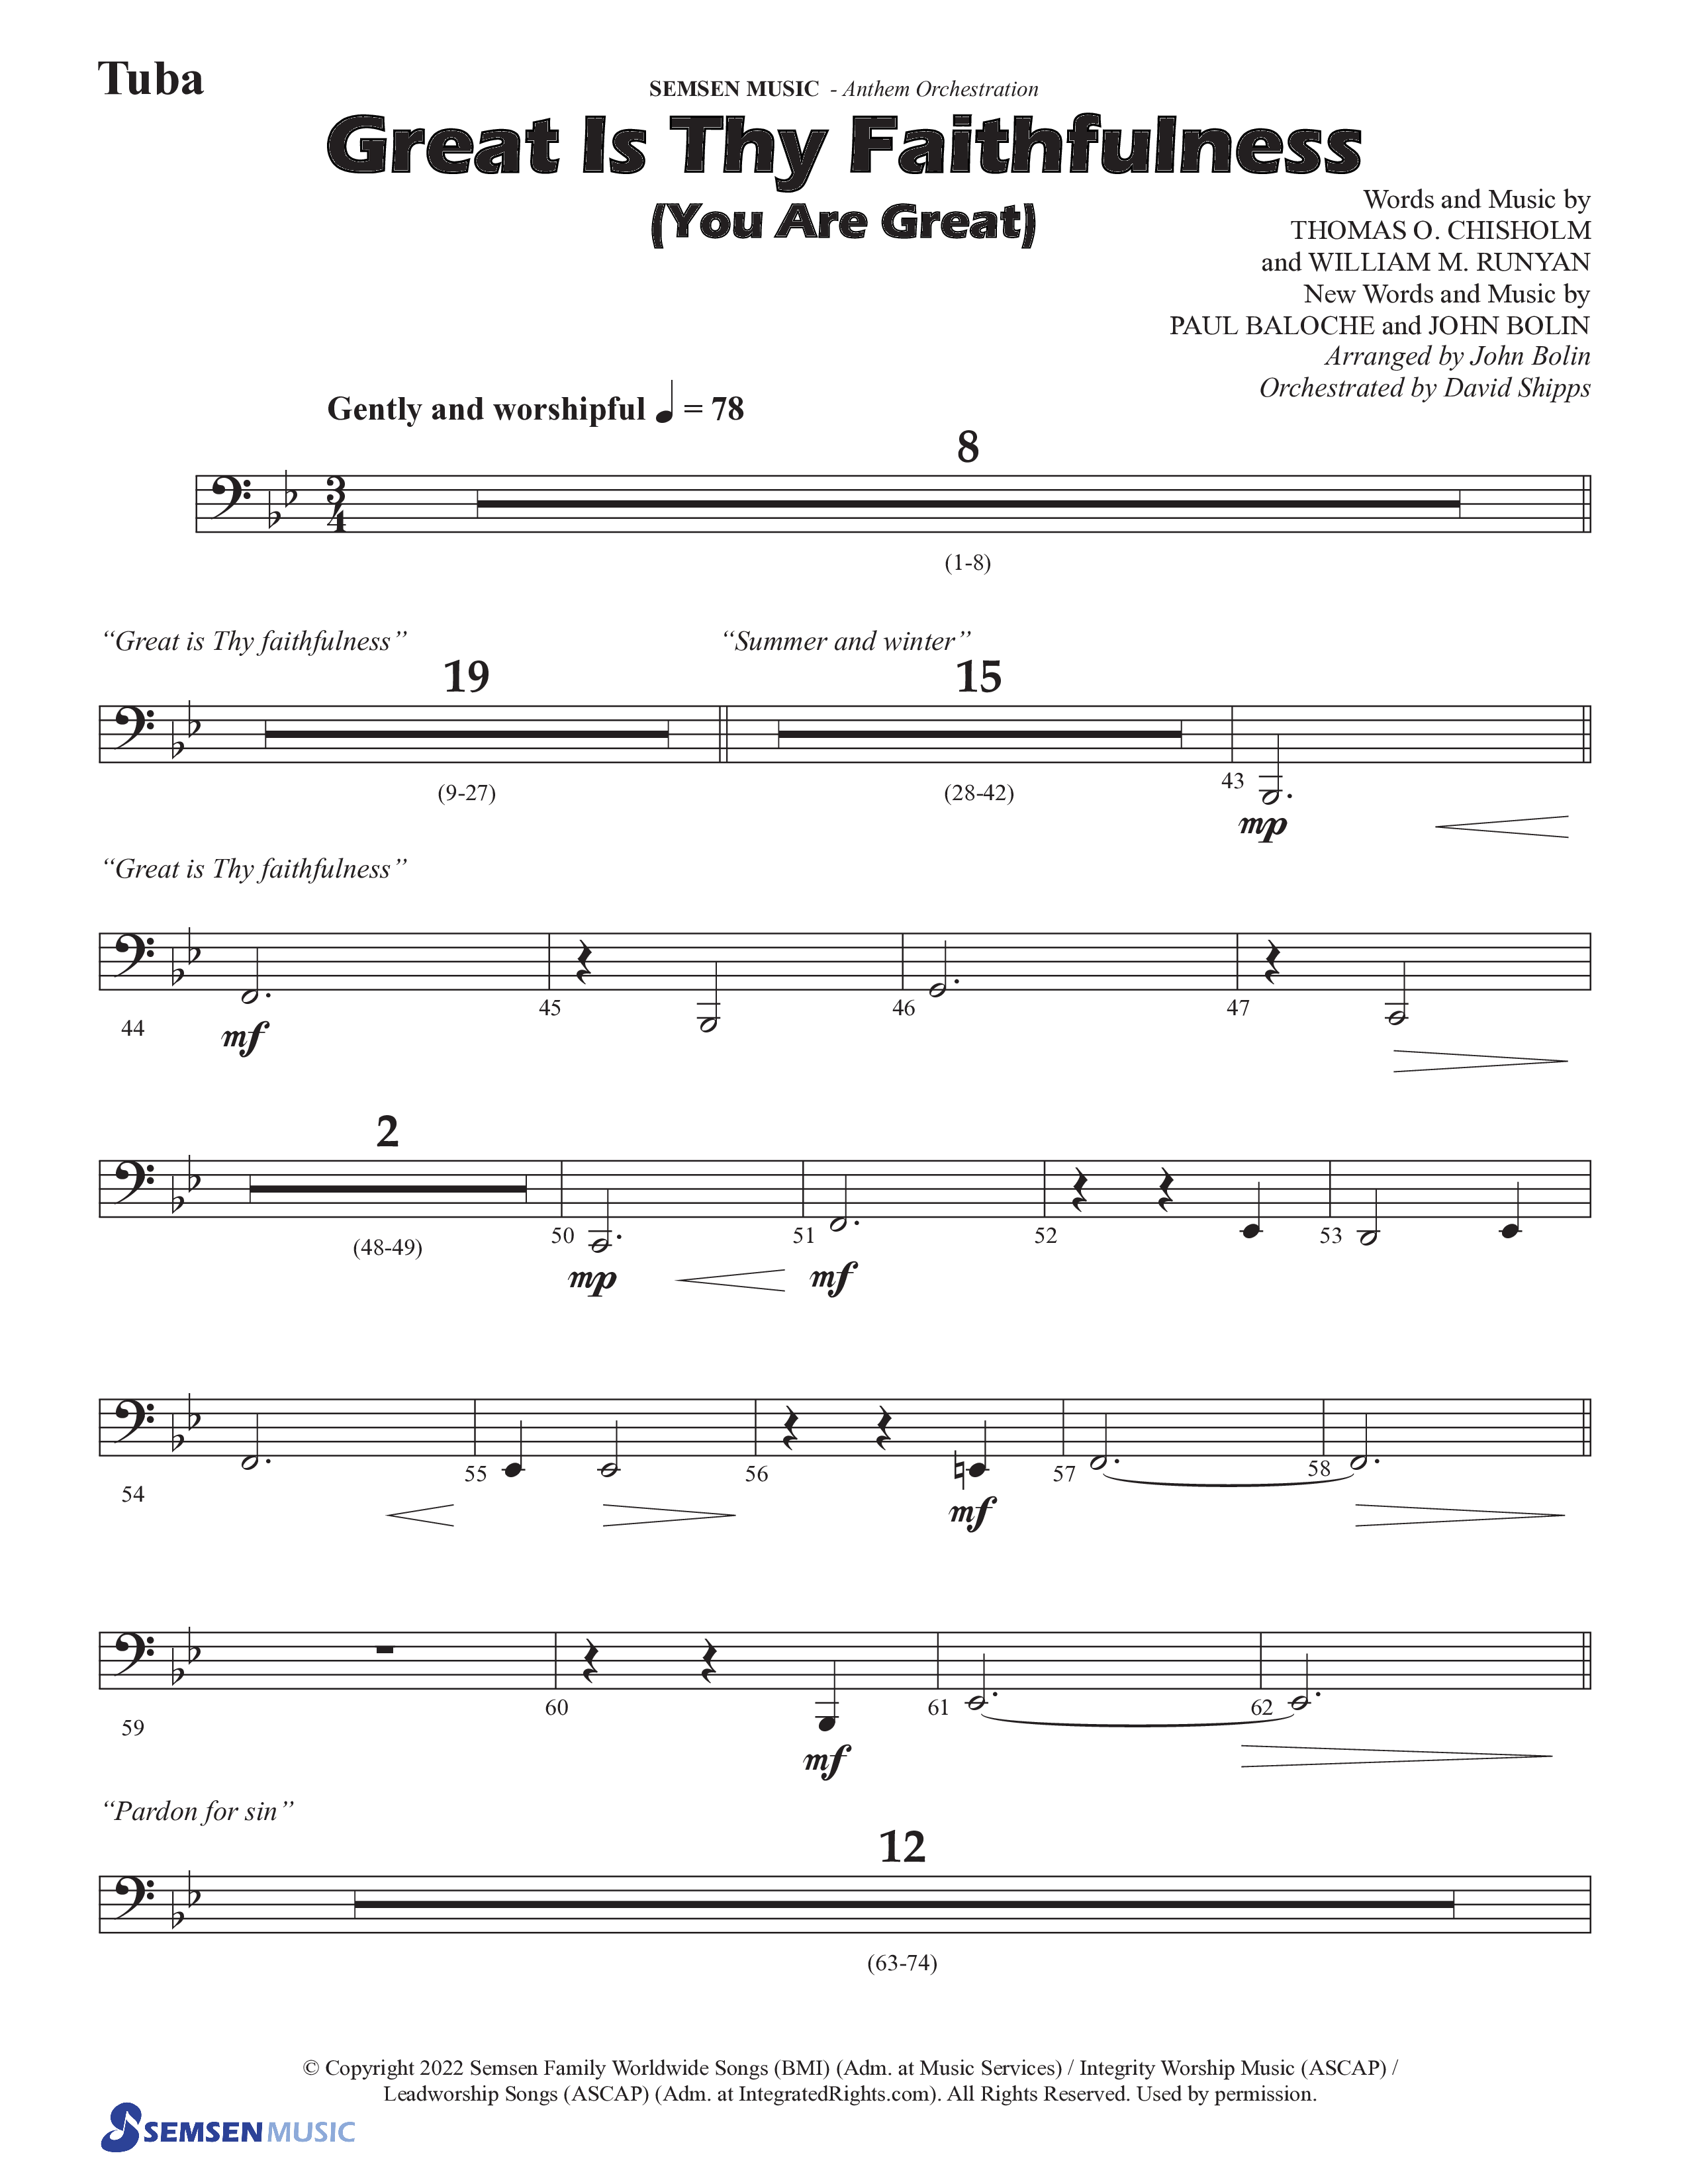 Great Is Thy Faithfulness (You Are Great) (Choral Anthem SATB) Tuba (Semsen Music / Arr. John Bolin / Orch. David Shipps)